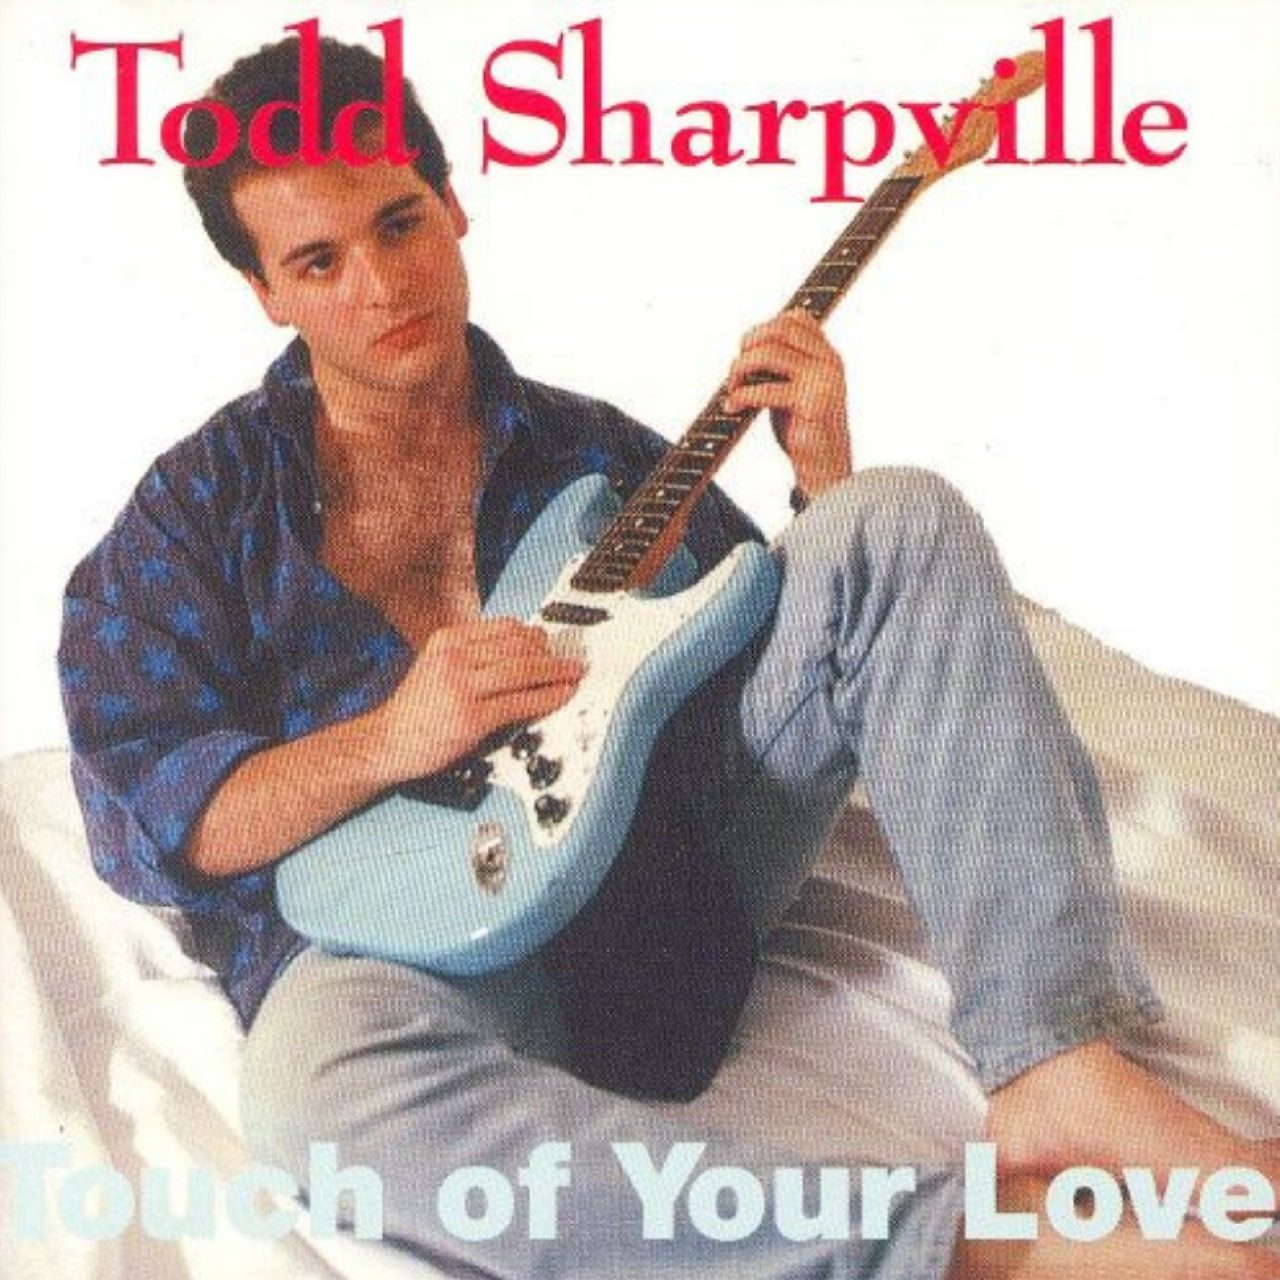 Todd Sharpville – Touch Of Your Love cover album